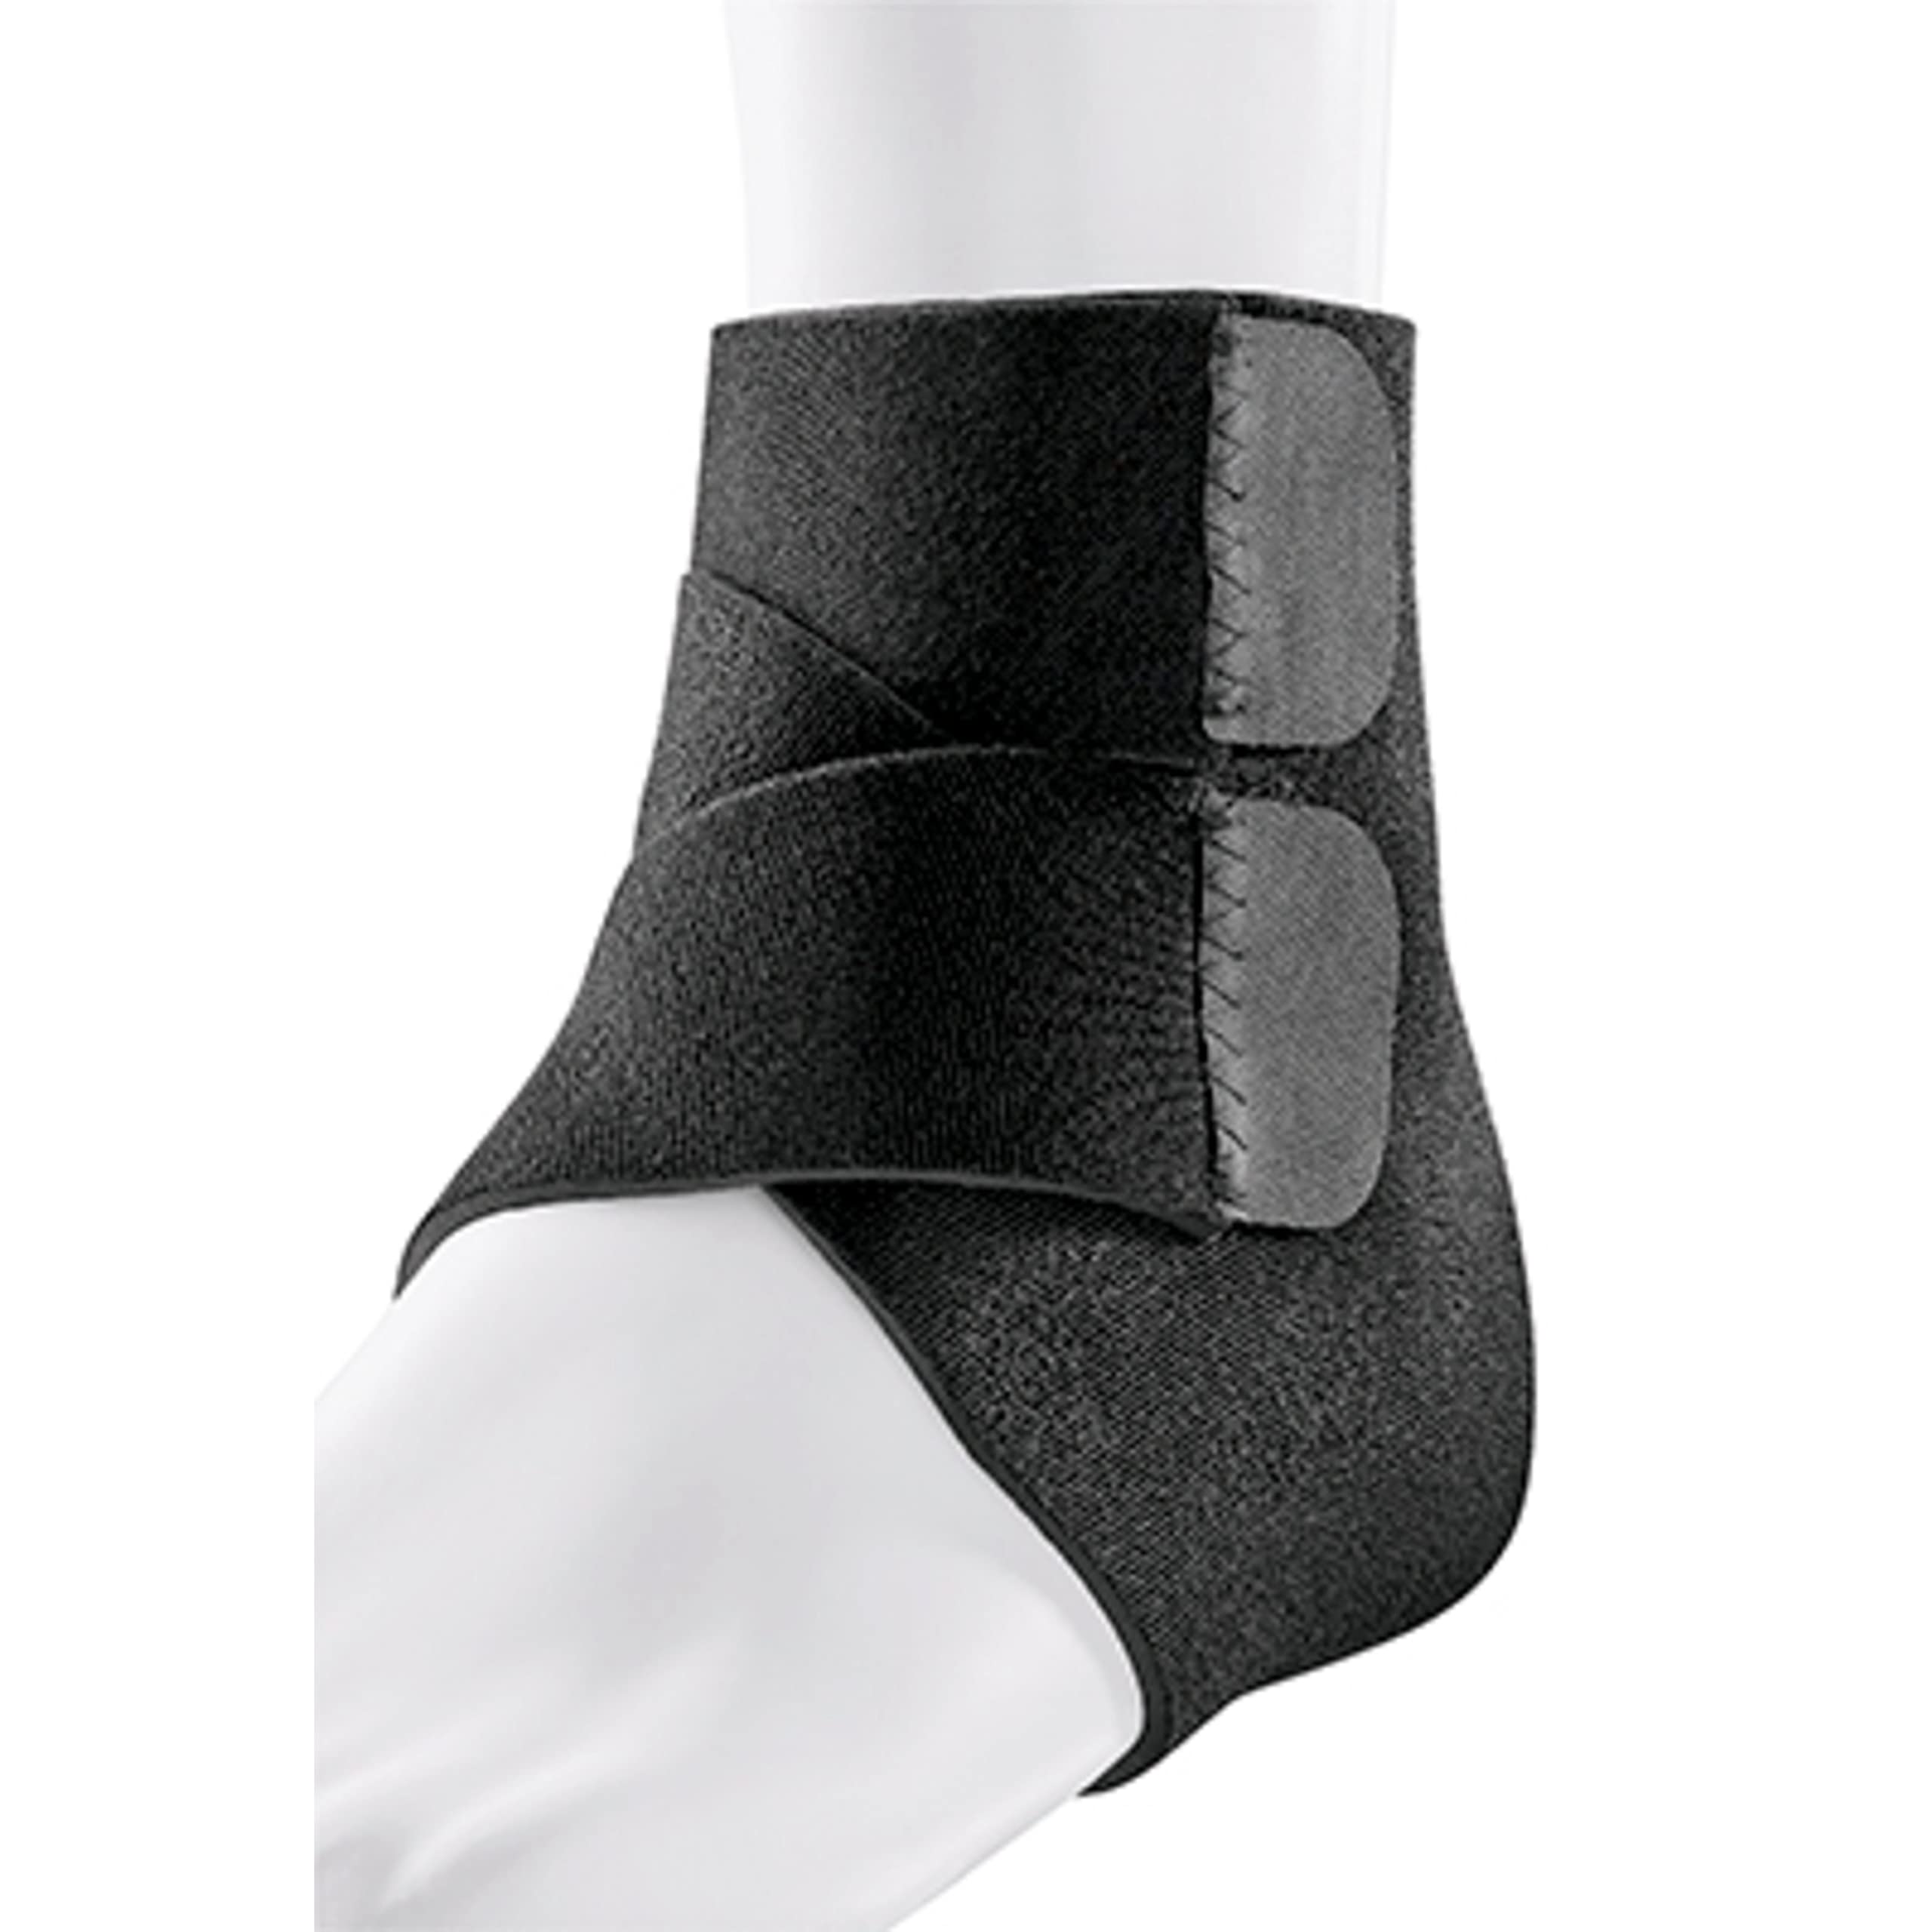 FUTURO Performance Ankle Support, Adjustable, Black, 1 Count (Pack of 1)